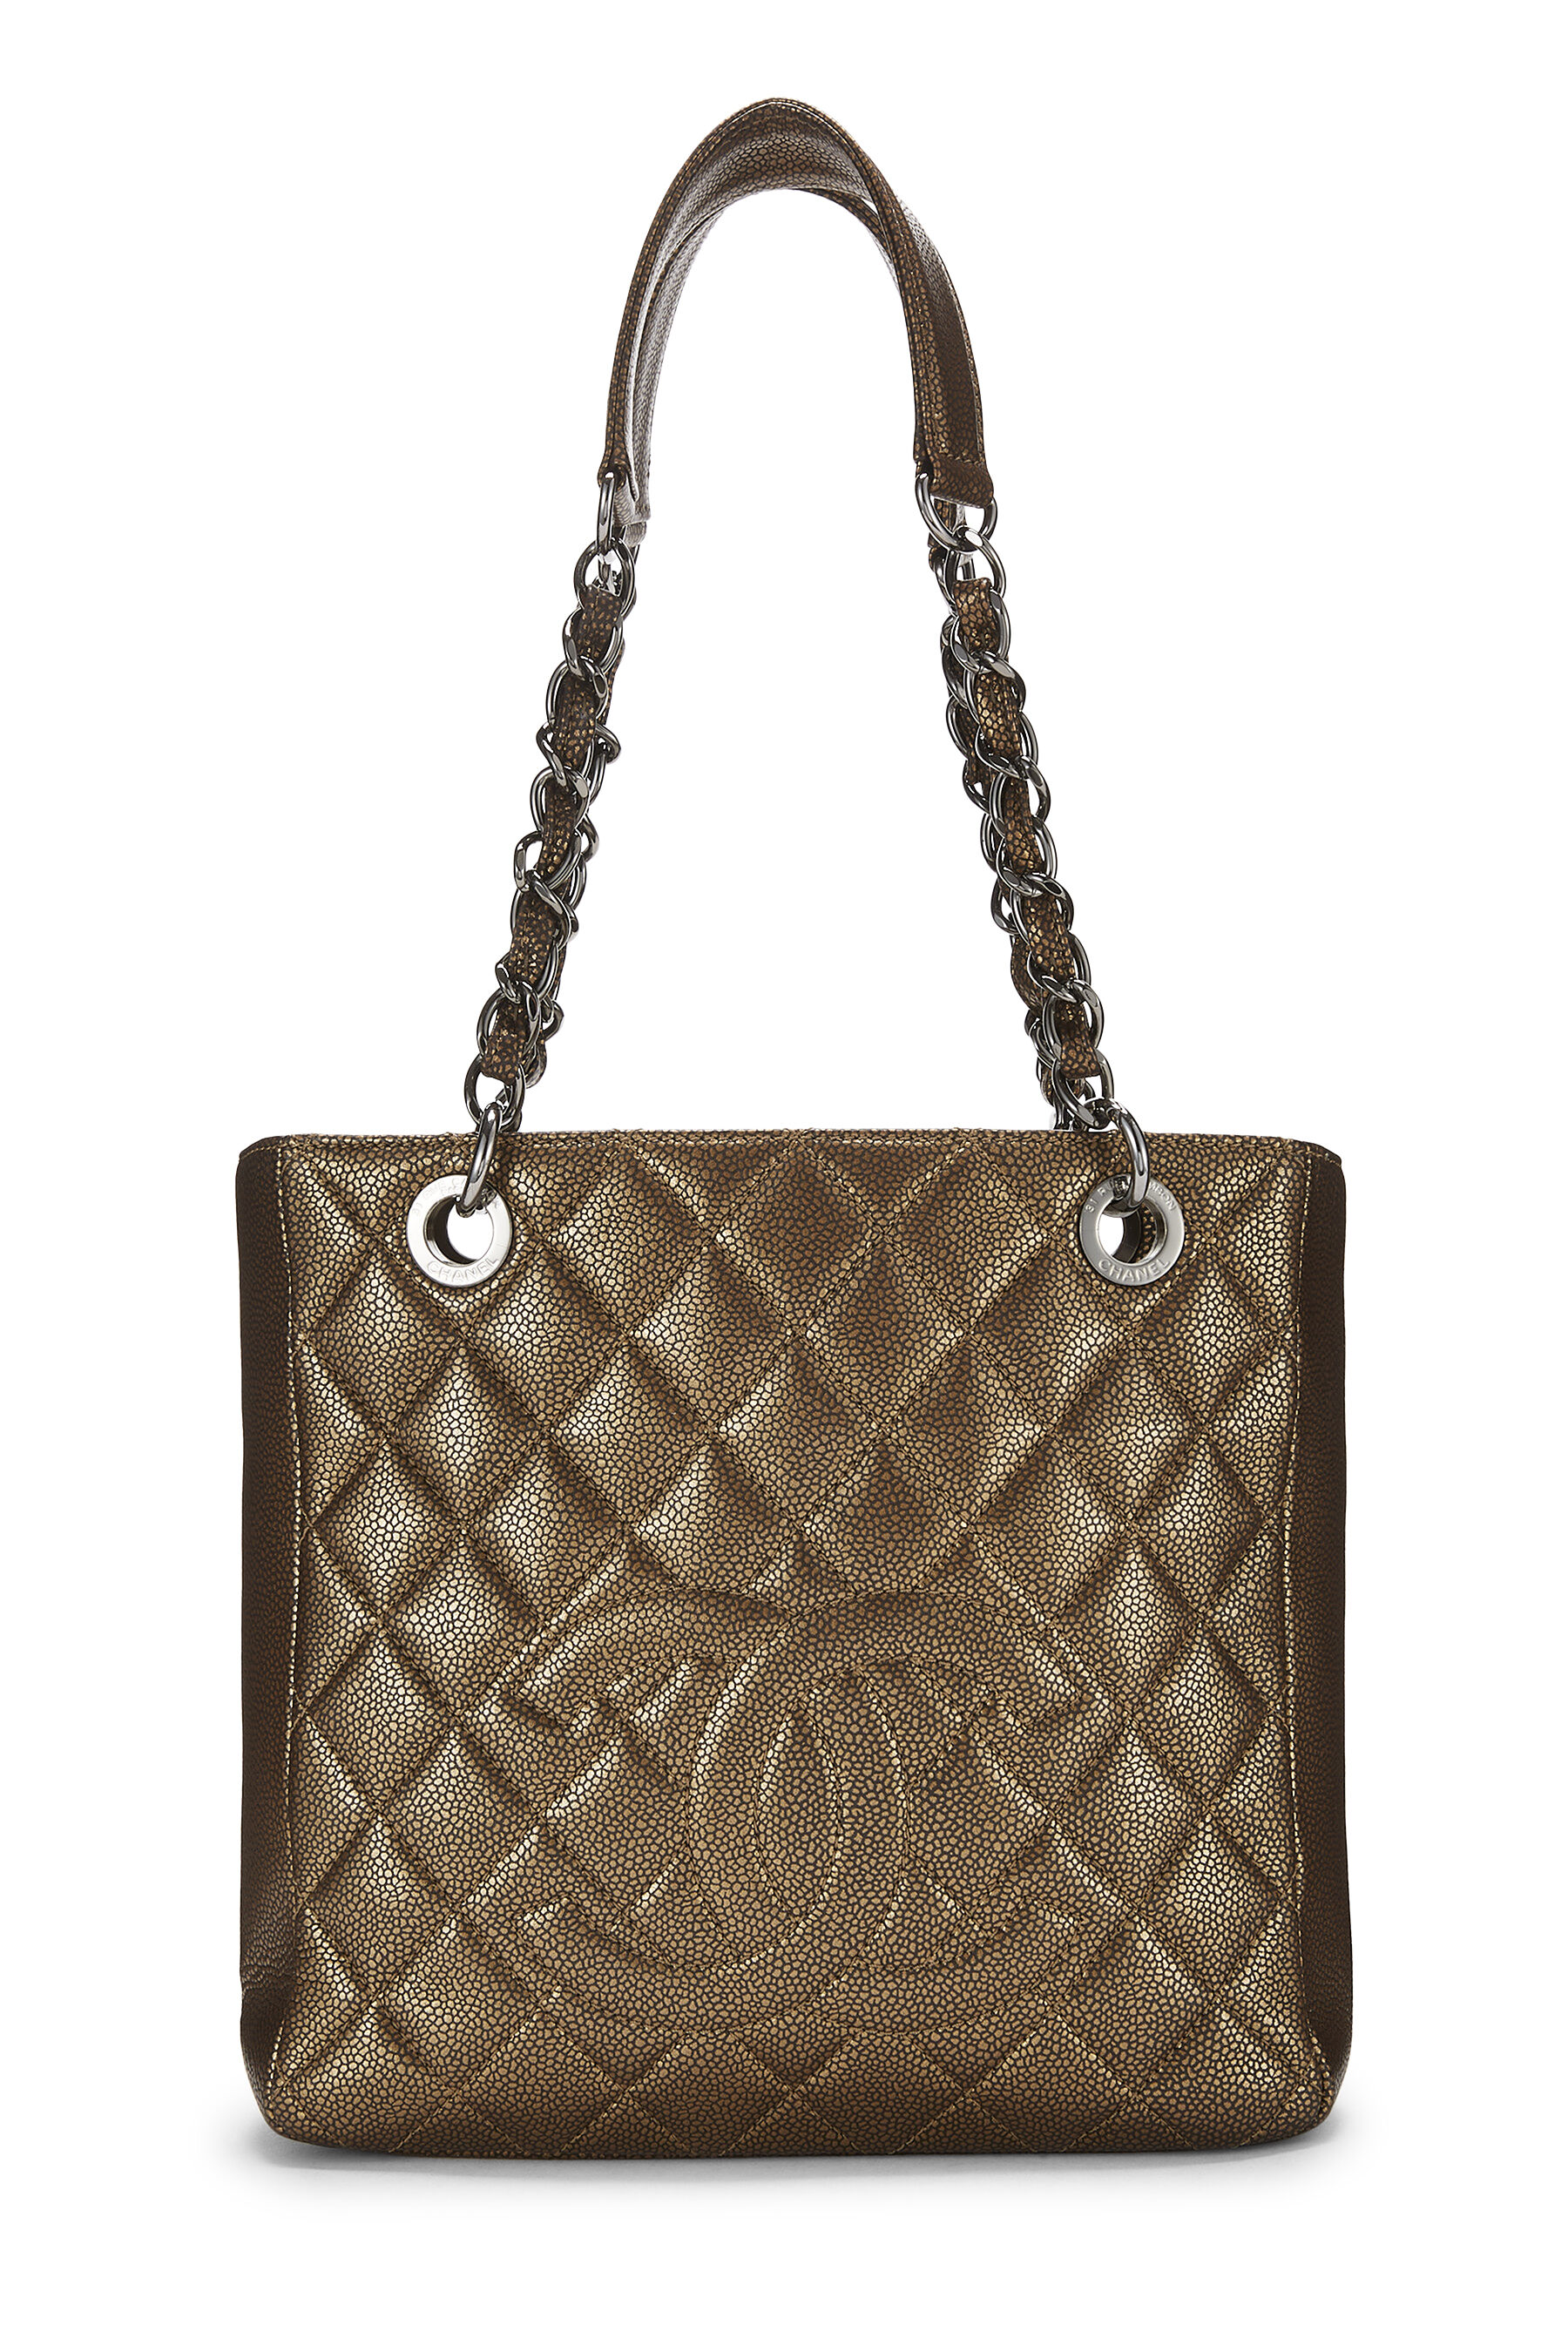 Chanel - Brown Quilted Caviar Petite Shopping Tote (PST)